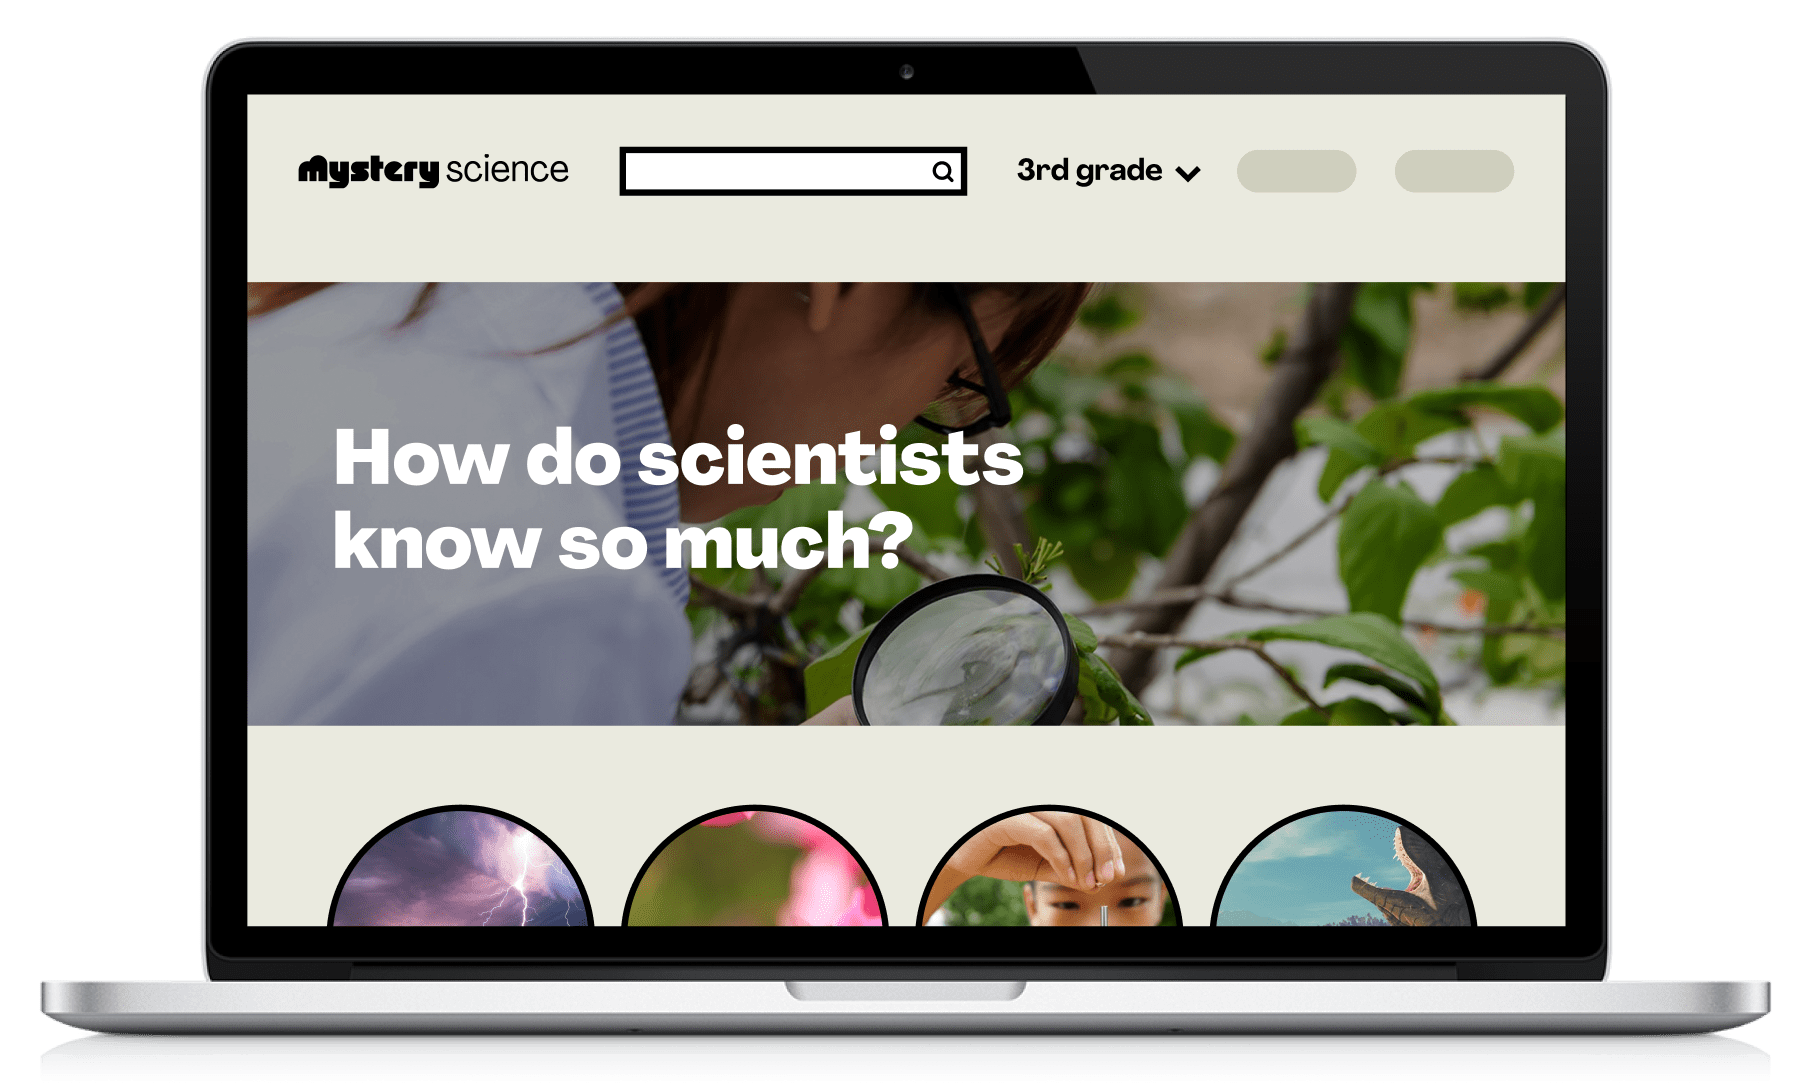 How do scientists know so much?